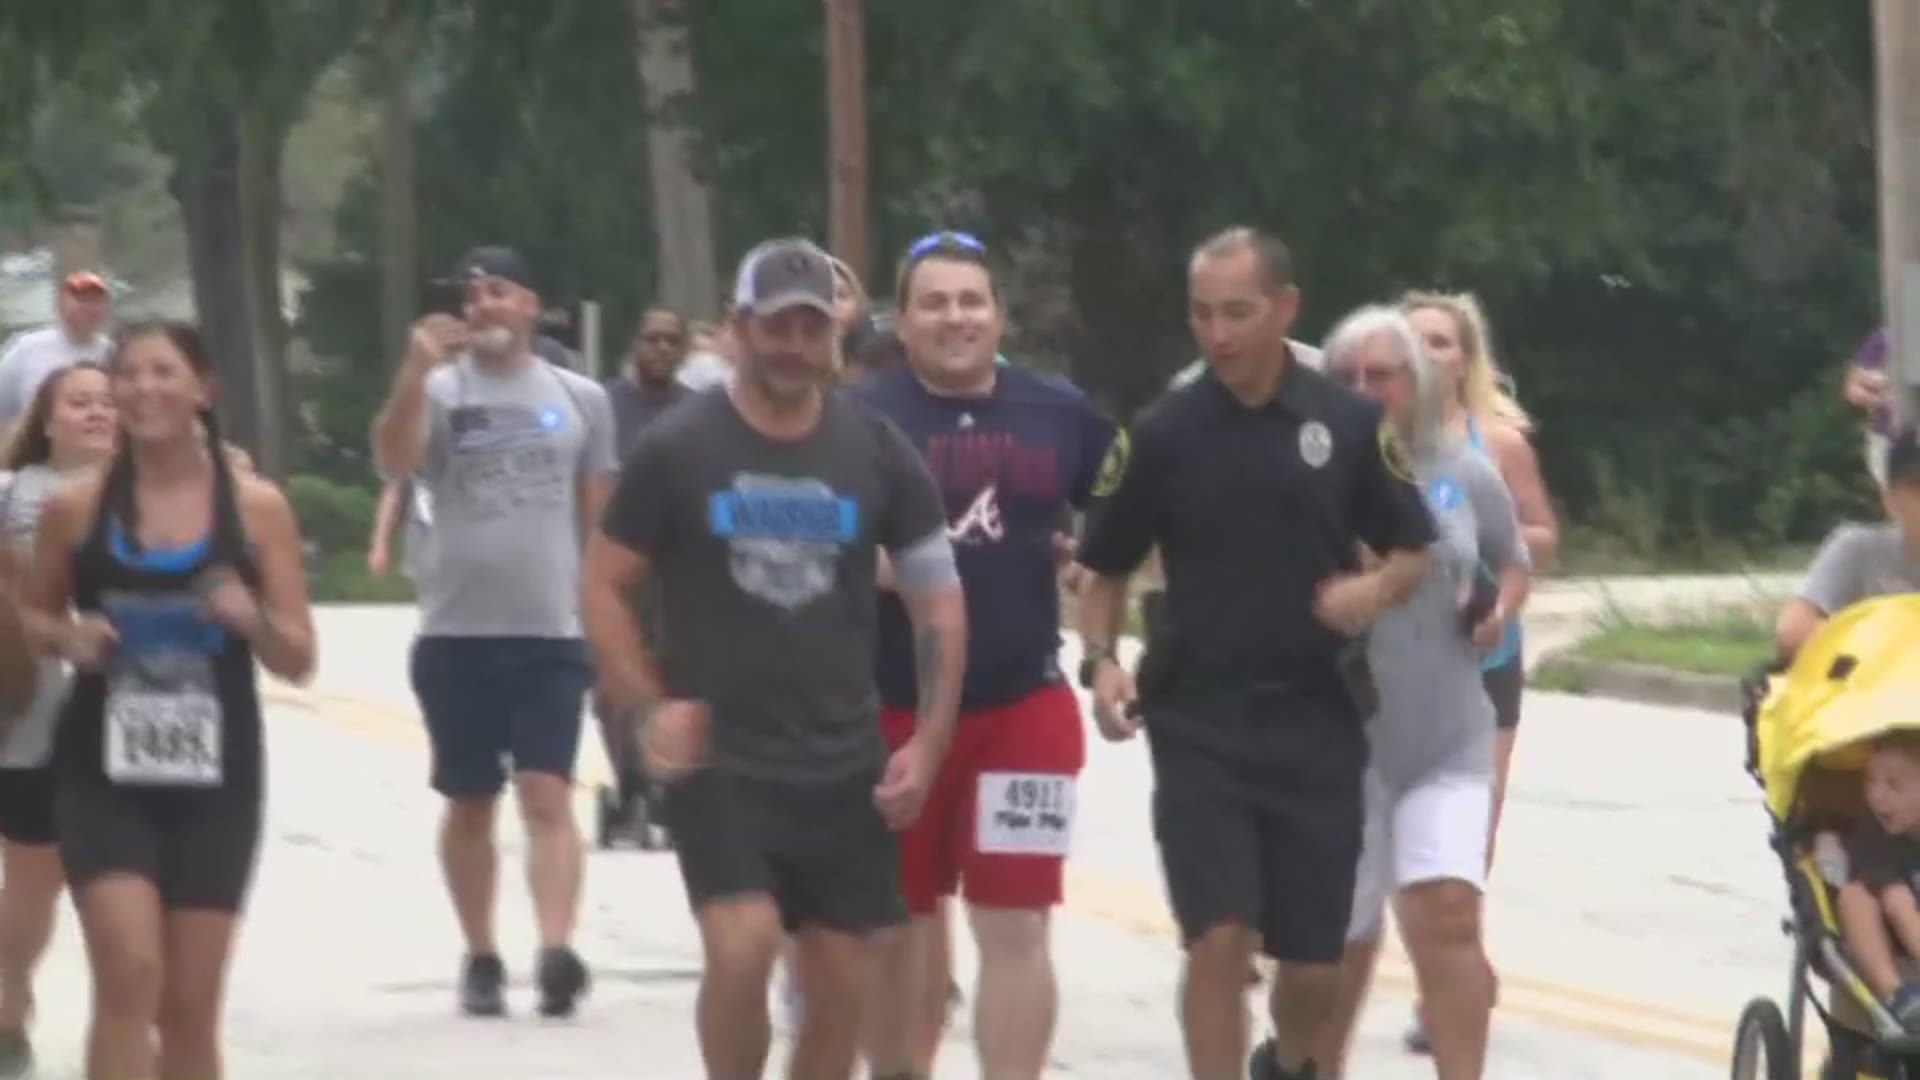 Less than a year ago, Covington Police Officer Matt Cooper was laying in a hospital bed, fighting for his life after he had been shot in the face by a shoplifting suspect. On Saturday, he ran in Covington's 36th annual Fuzz Run, which supports injured officers as they recover from injuries like his.